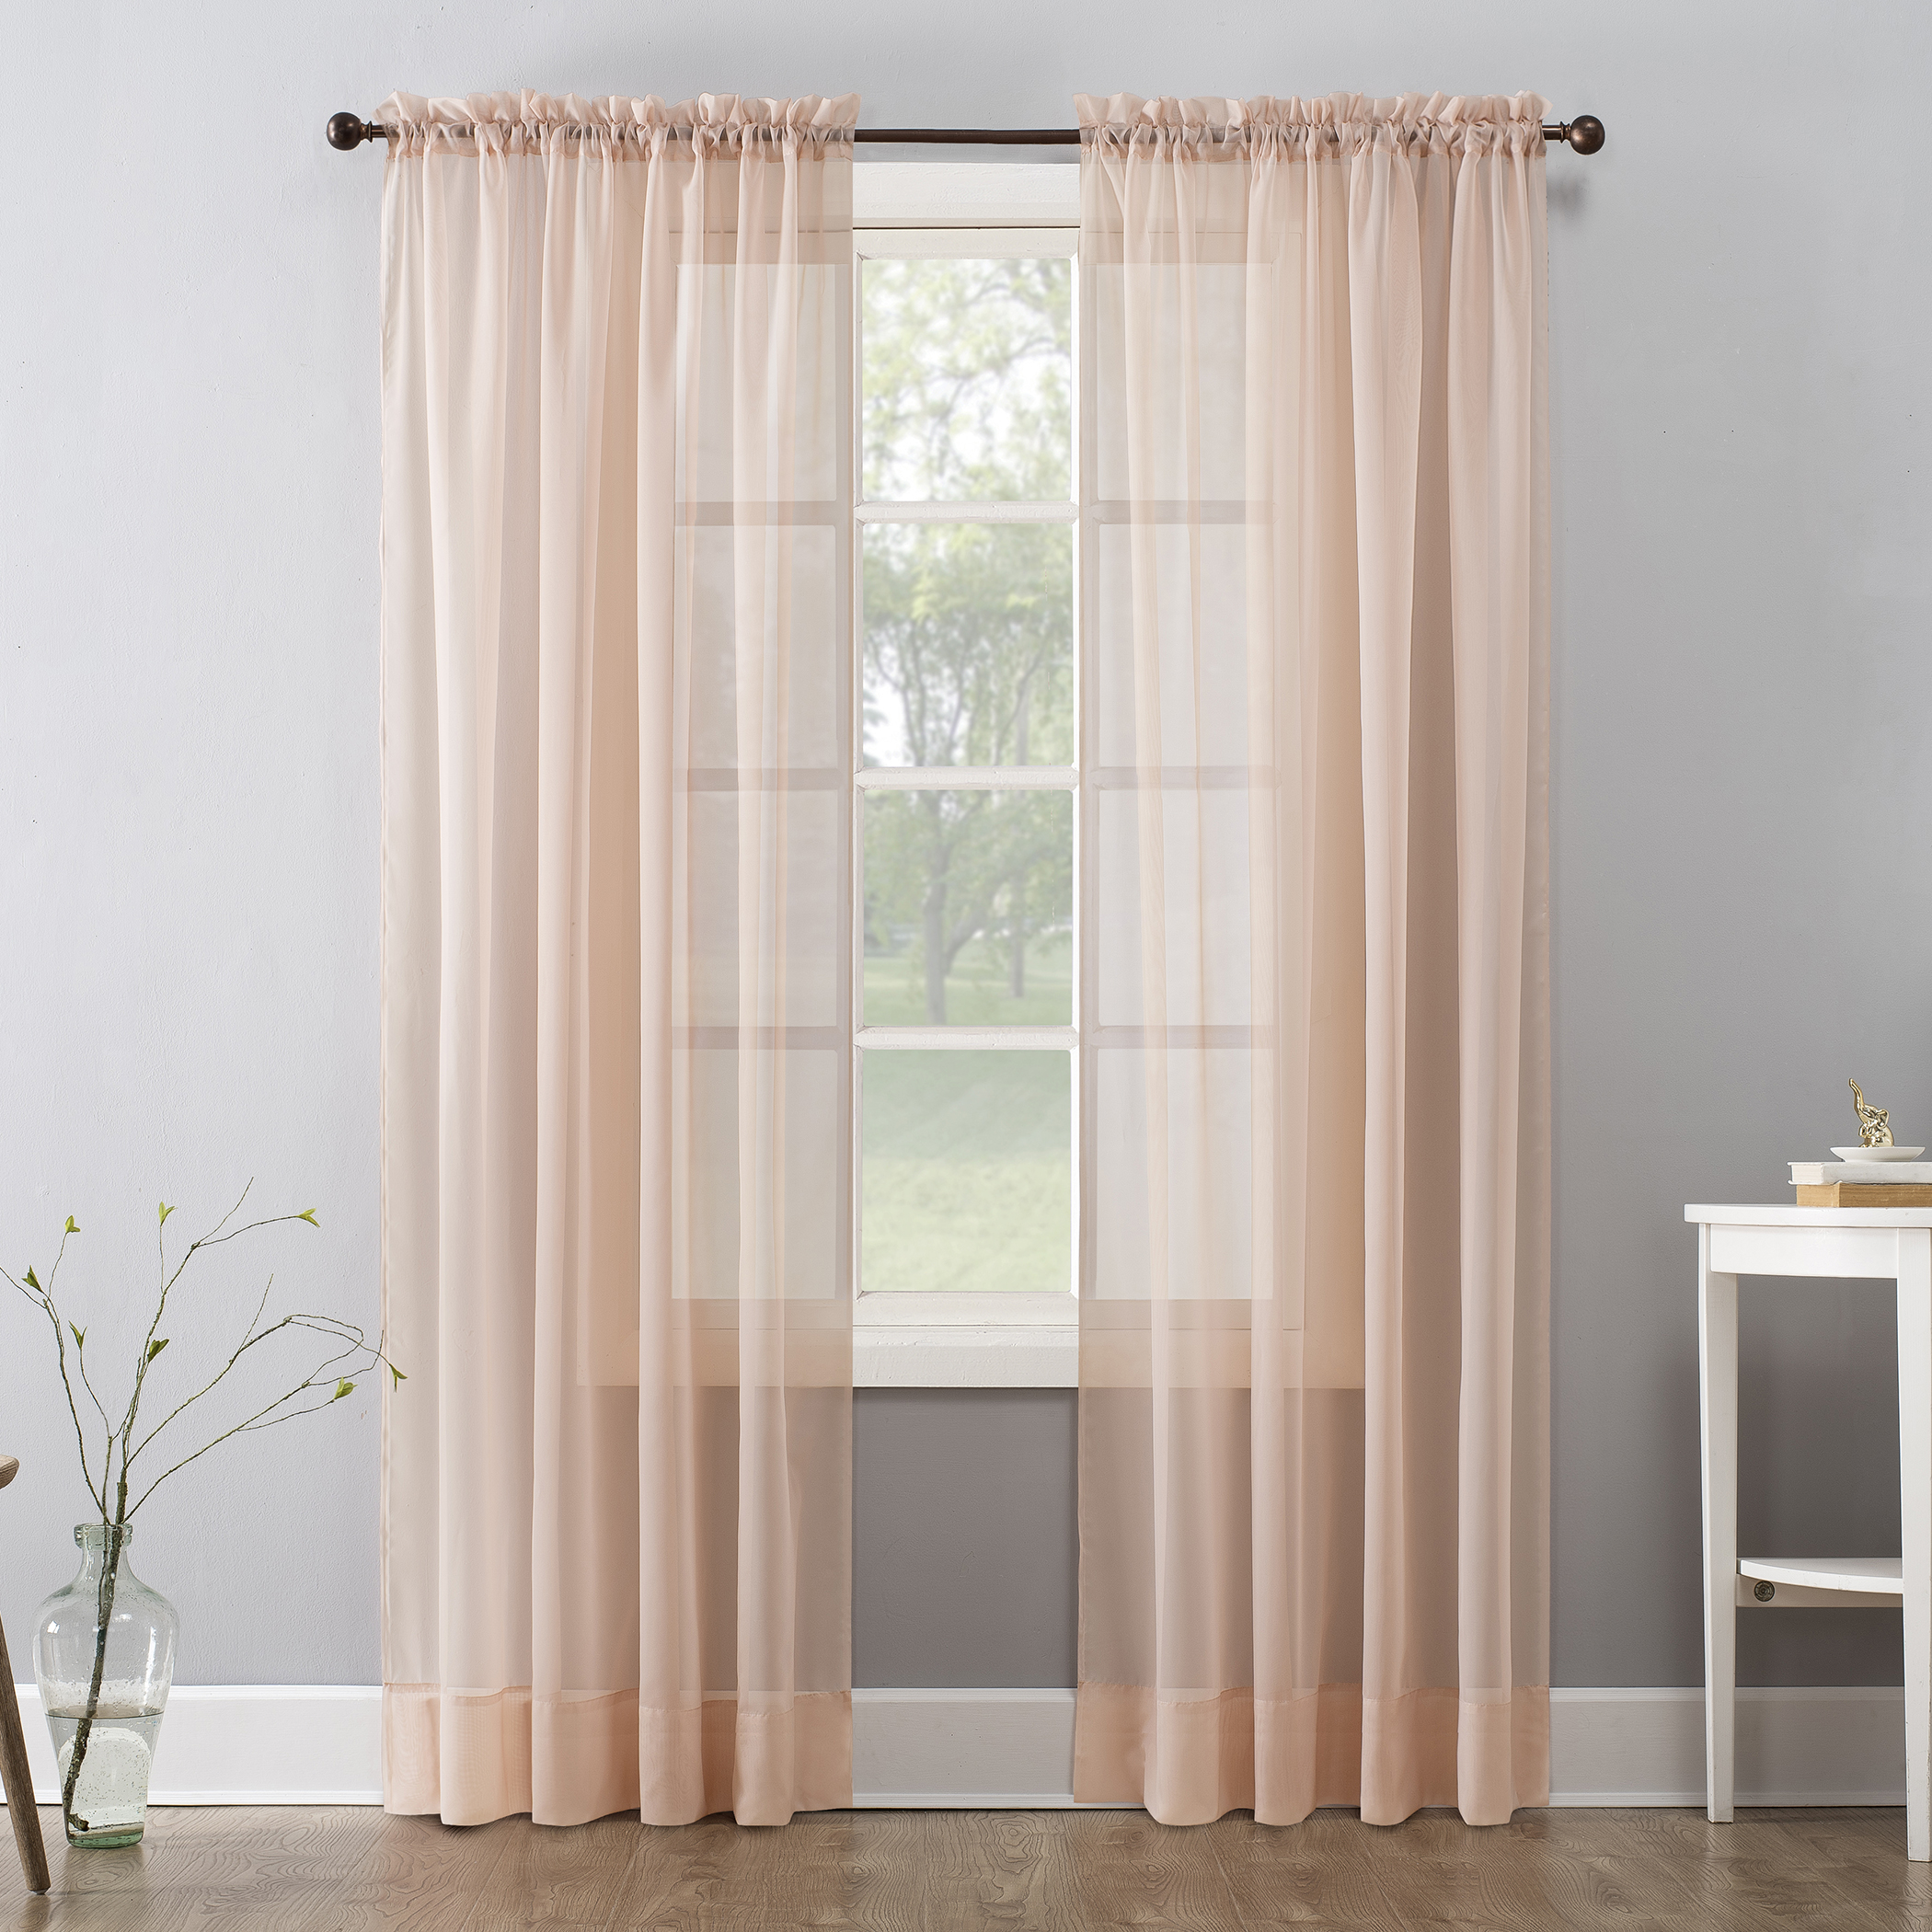 Mainstays Marjorie Sheer Voile Curtain, Single Panel, 59"w x 63"l, Cherry Blossom, Adult - image 1 of 7